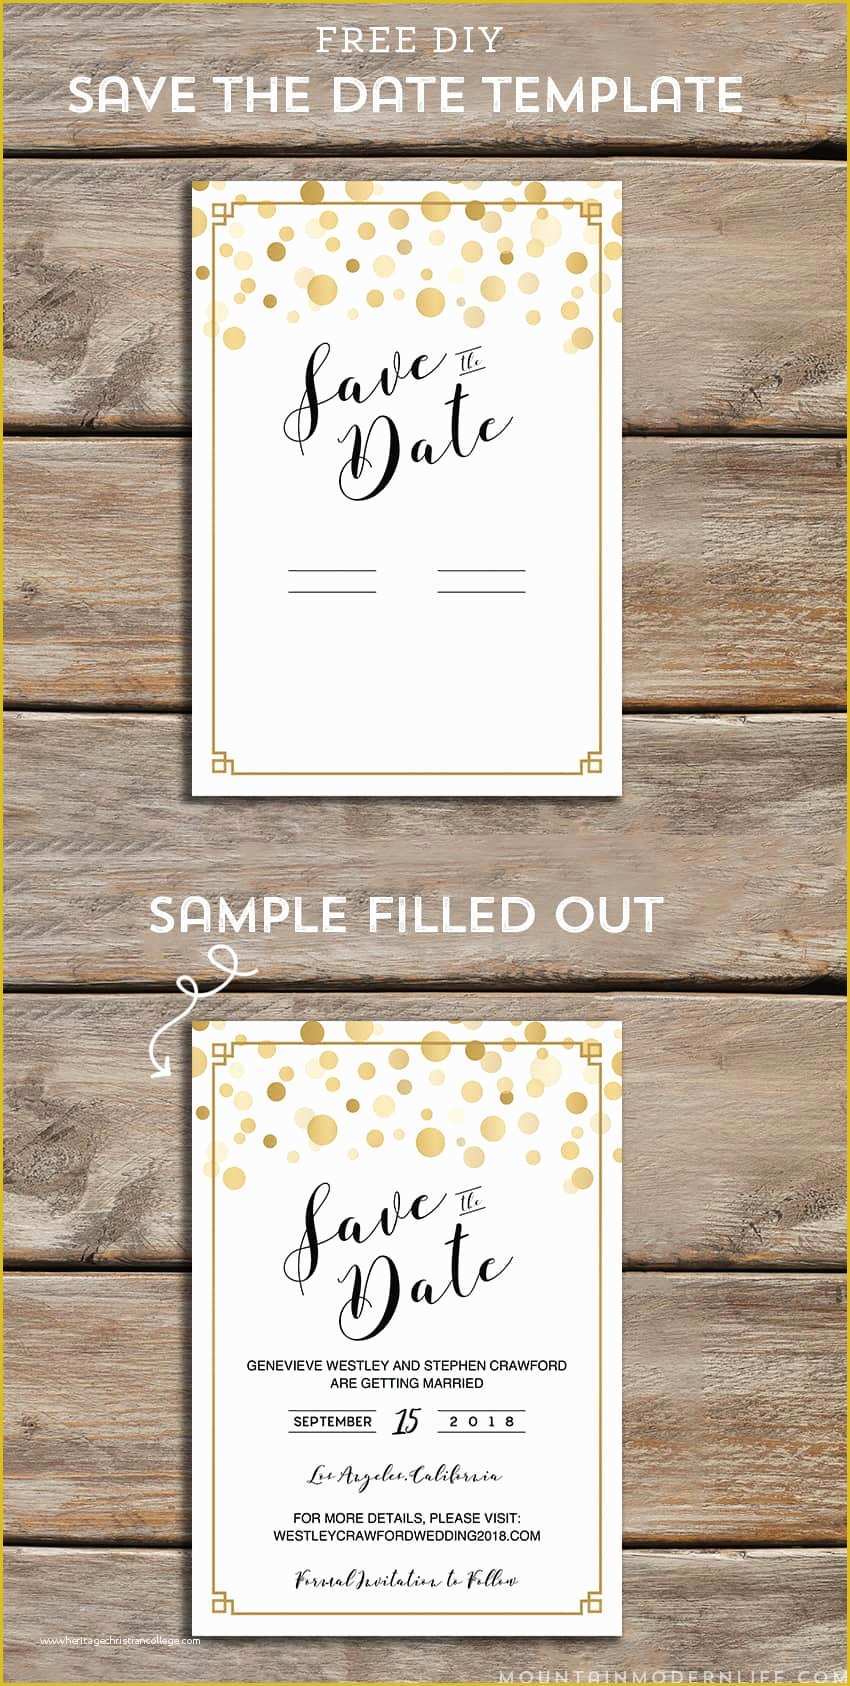 Free Save the Date Templates Of Modern Diy Save the Date Free Printable